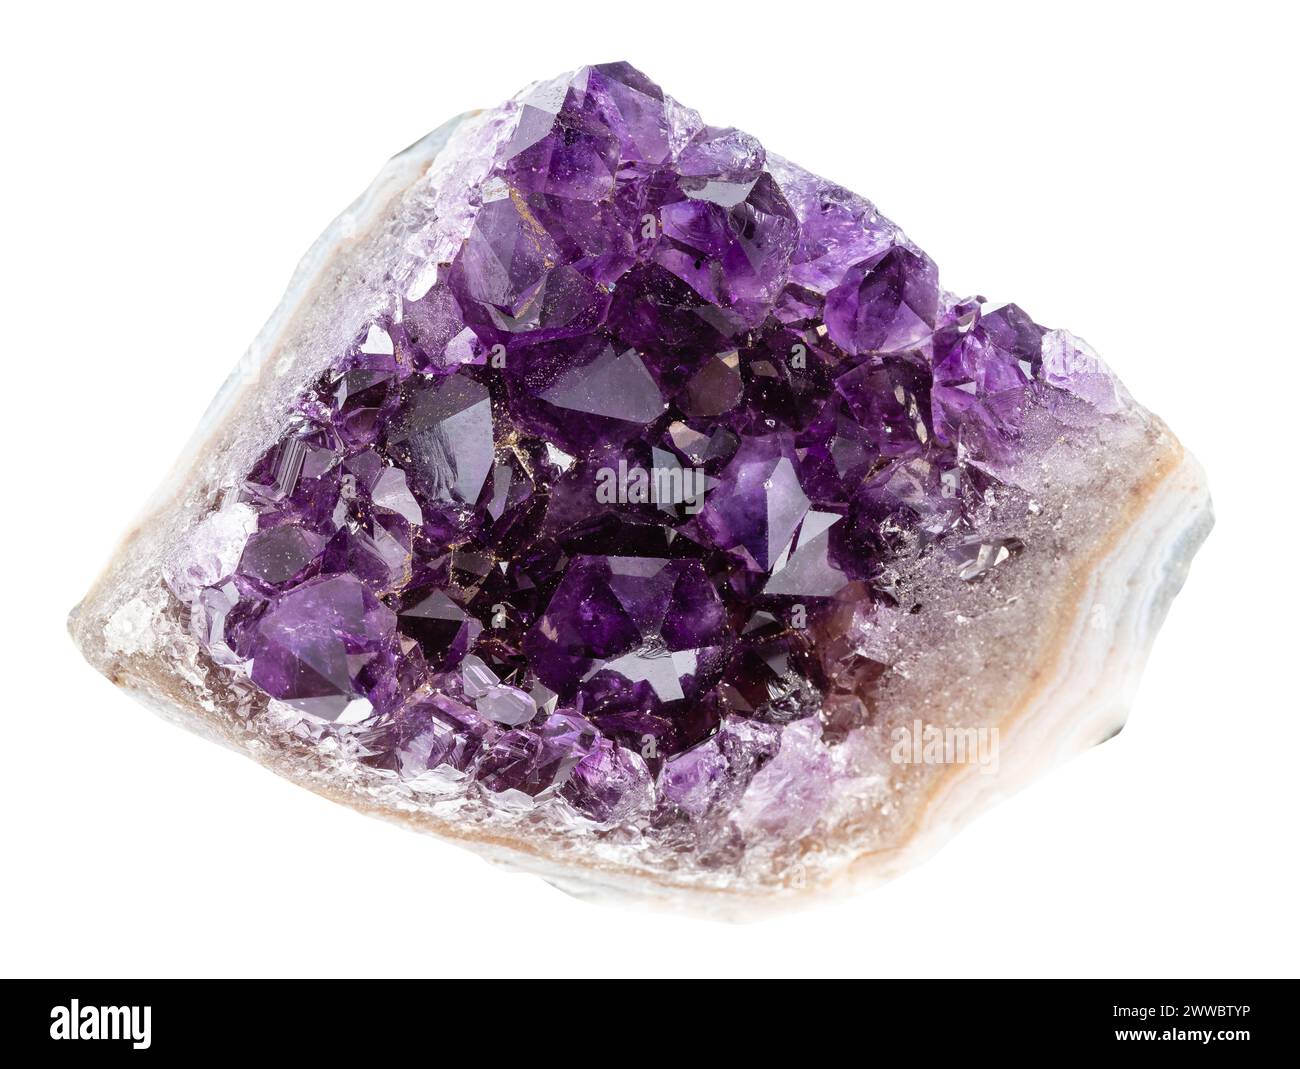 close up of sample of natural stone from geological collection - rough geode of amethyst crystals isolated on white background Stock Photo